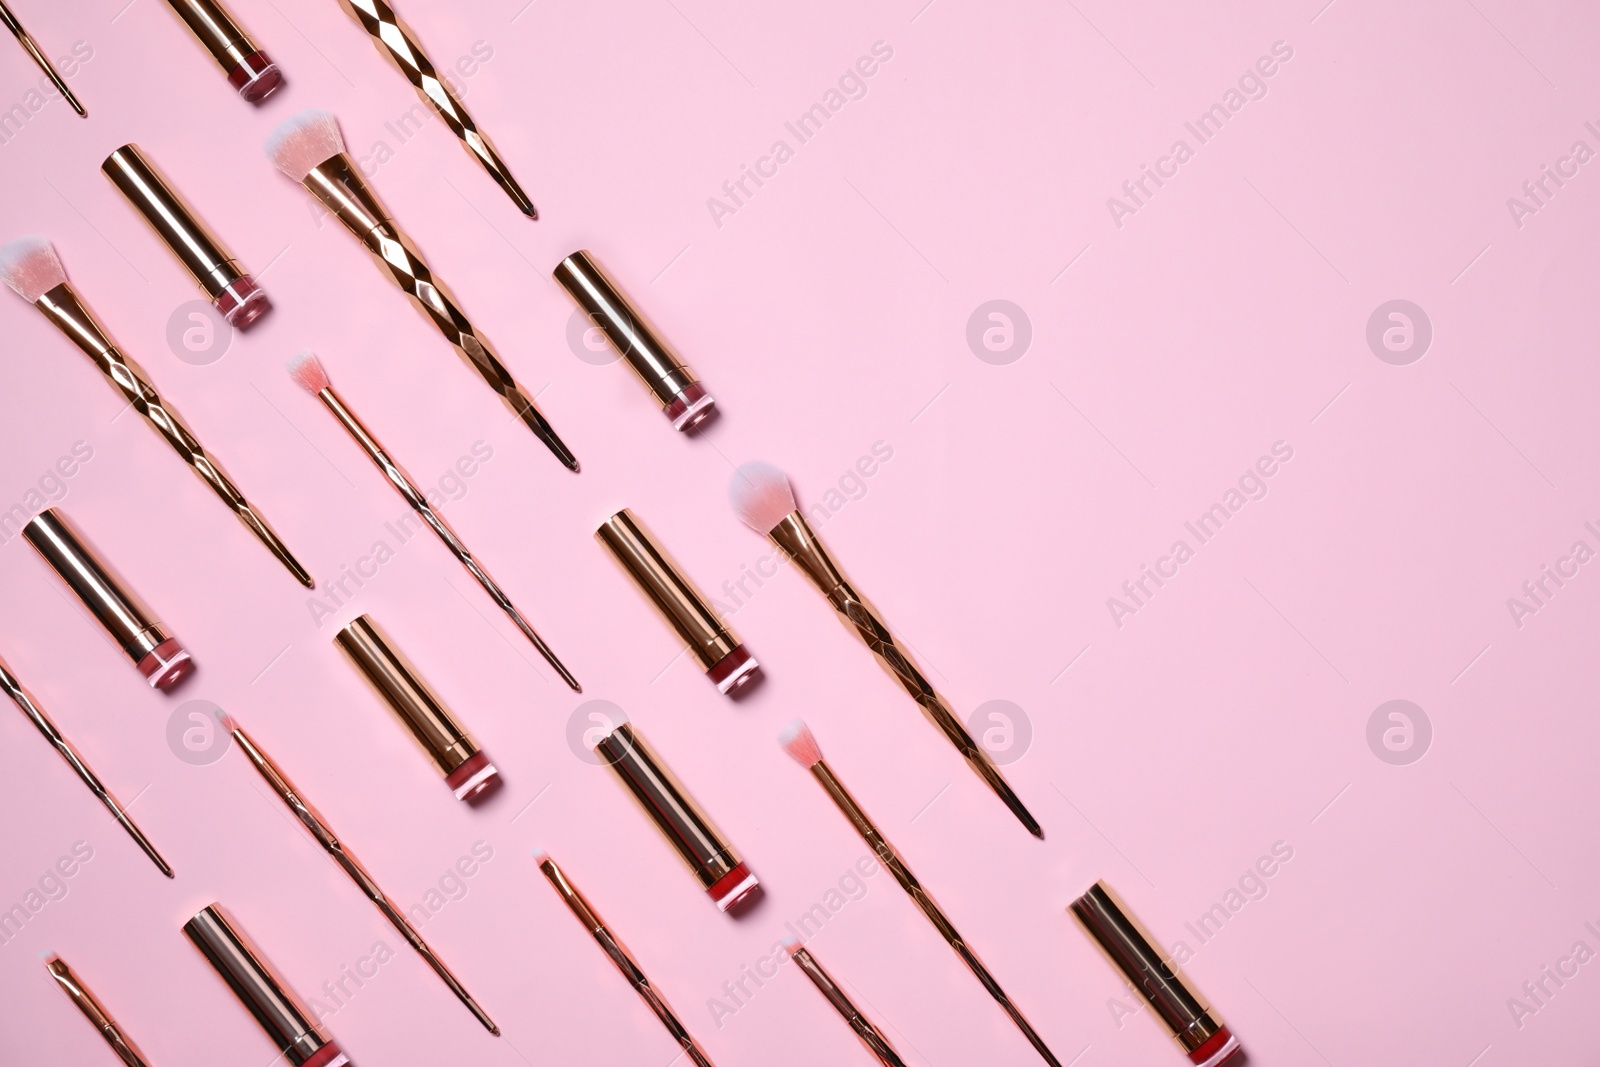 Photo of Makeup brushes and lipsticks on pink background, flat lay. Space for text